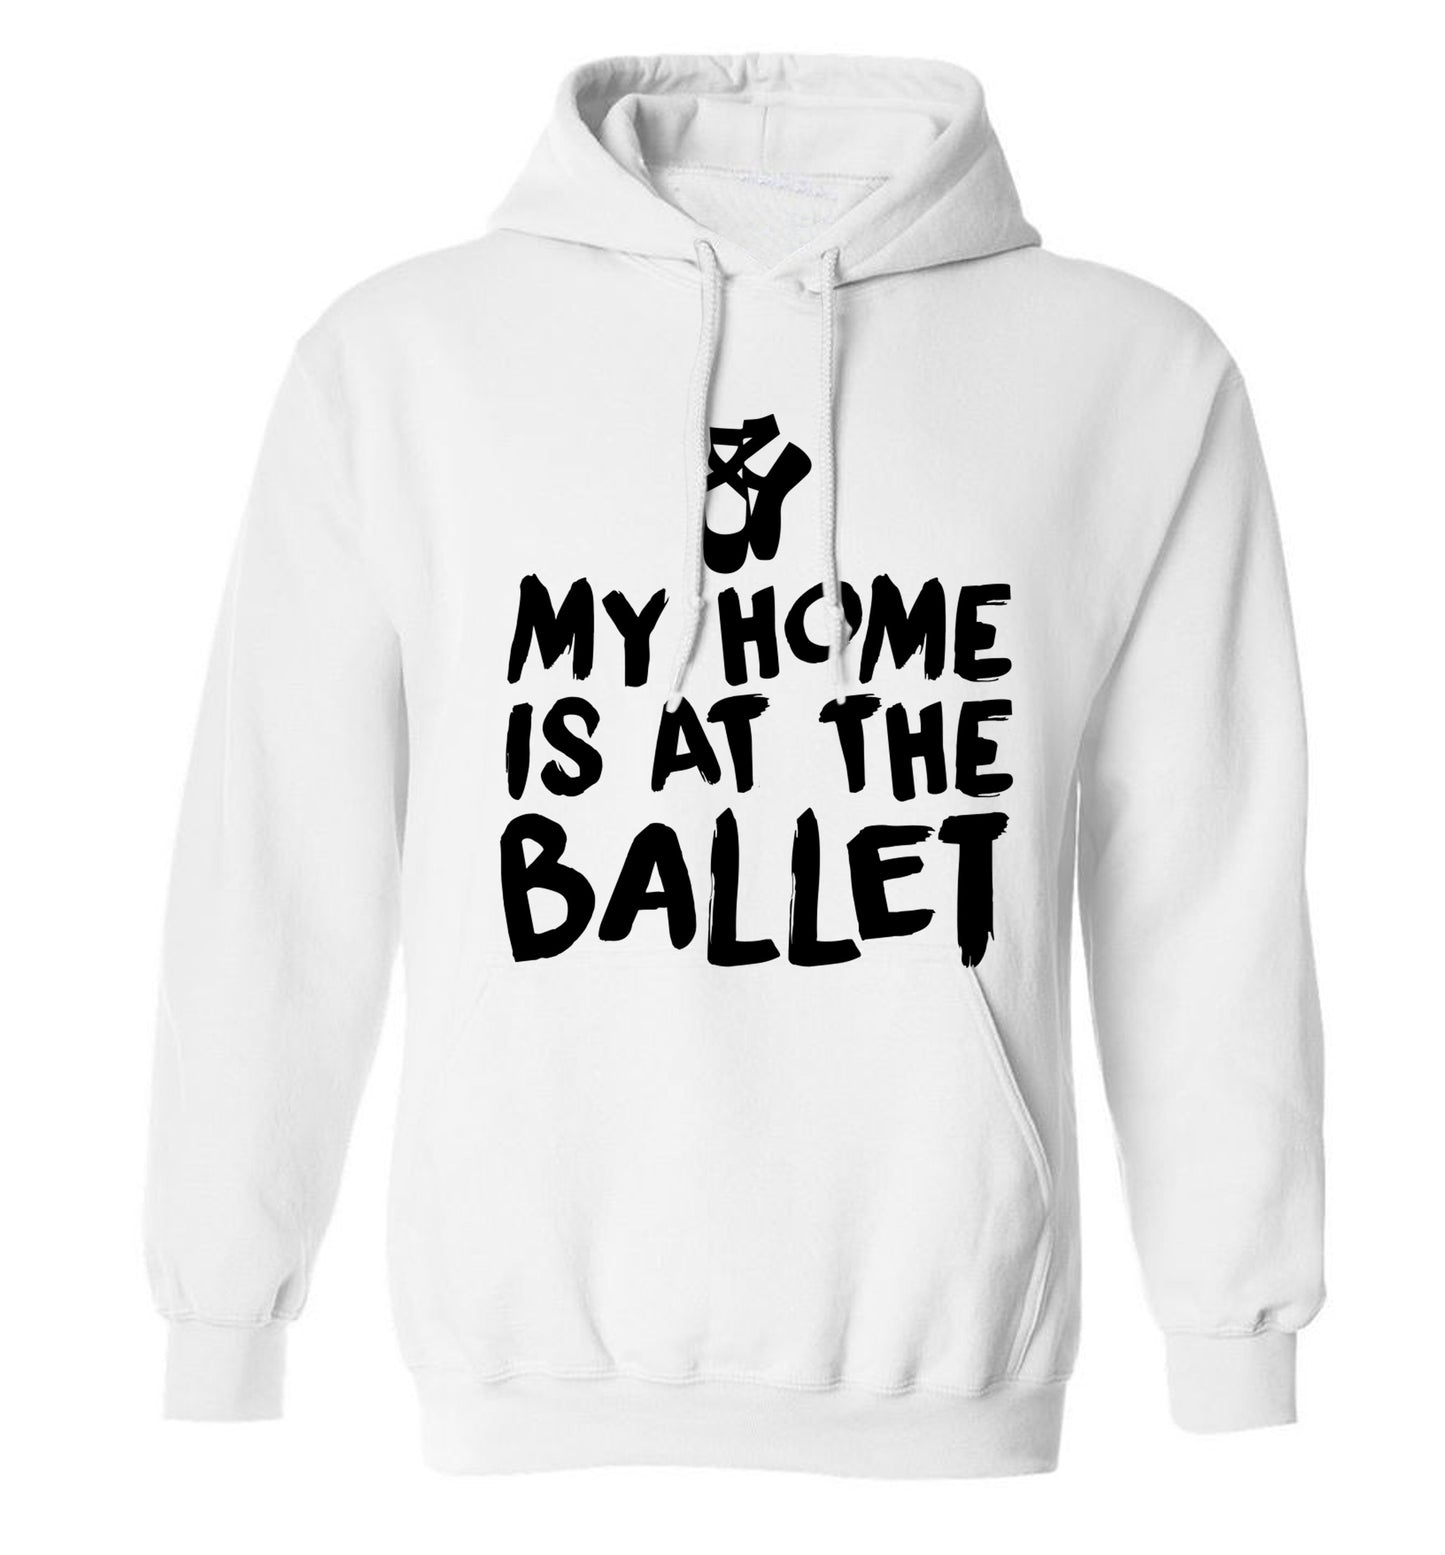 My home is at the dance studio adults unisex white hoodie 2XL